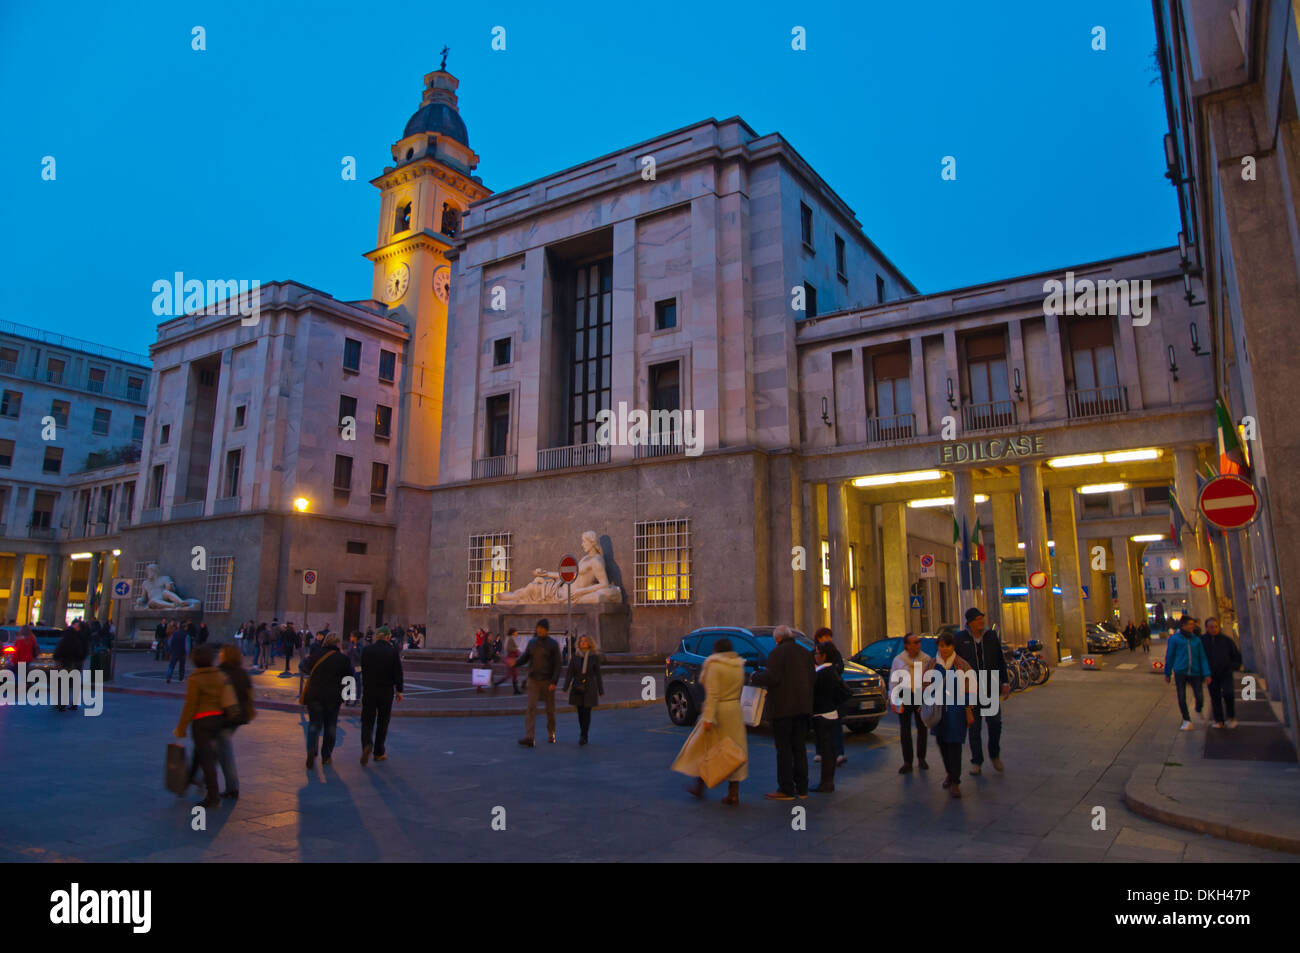 Piazza CLN square central Turin Piedmont region Italy Europe Stock Photo